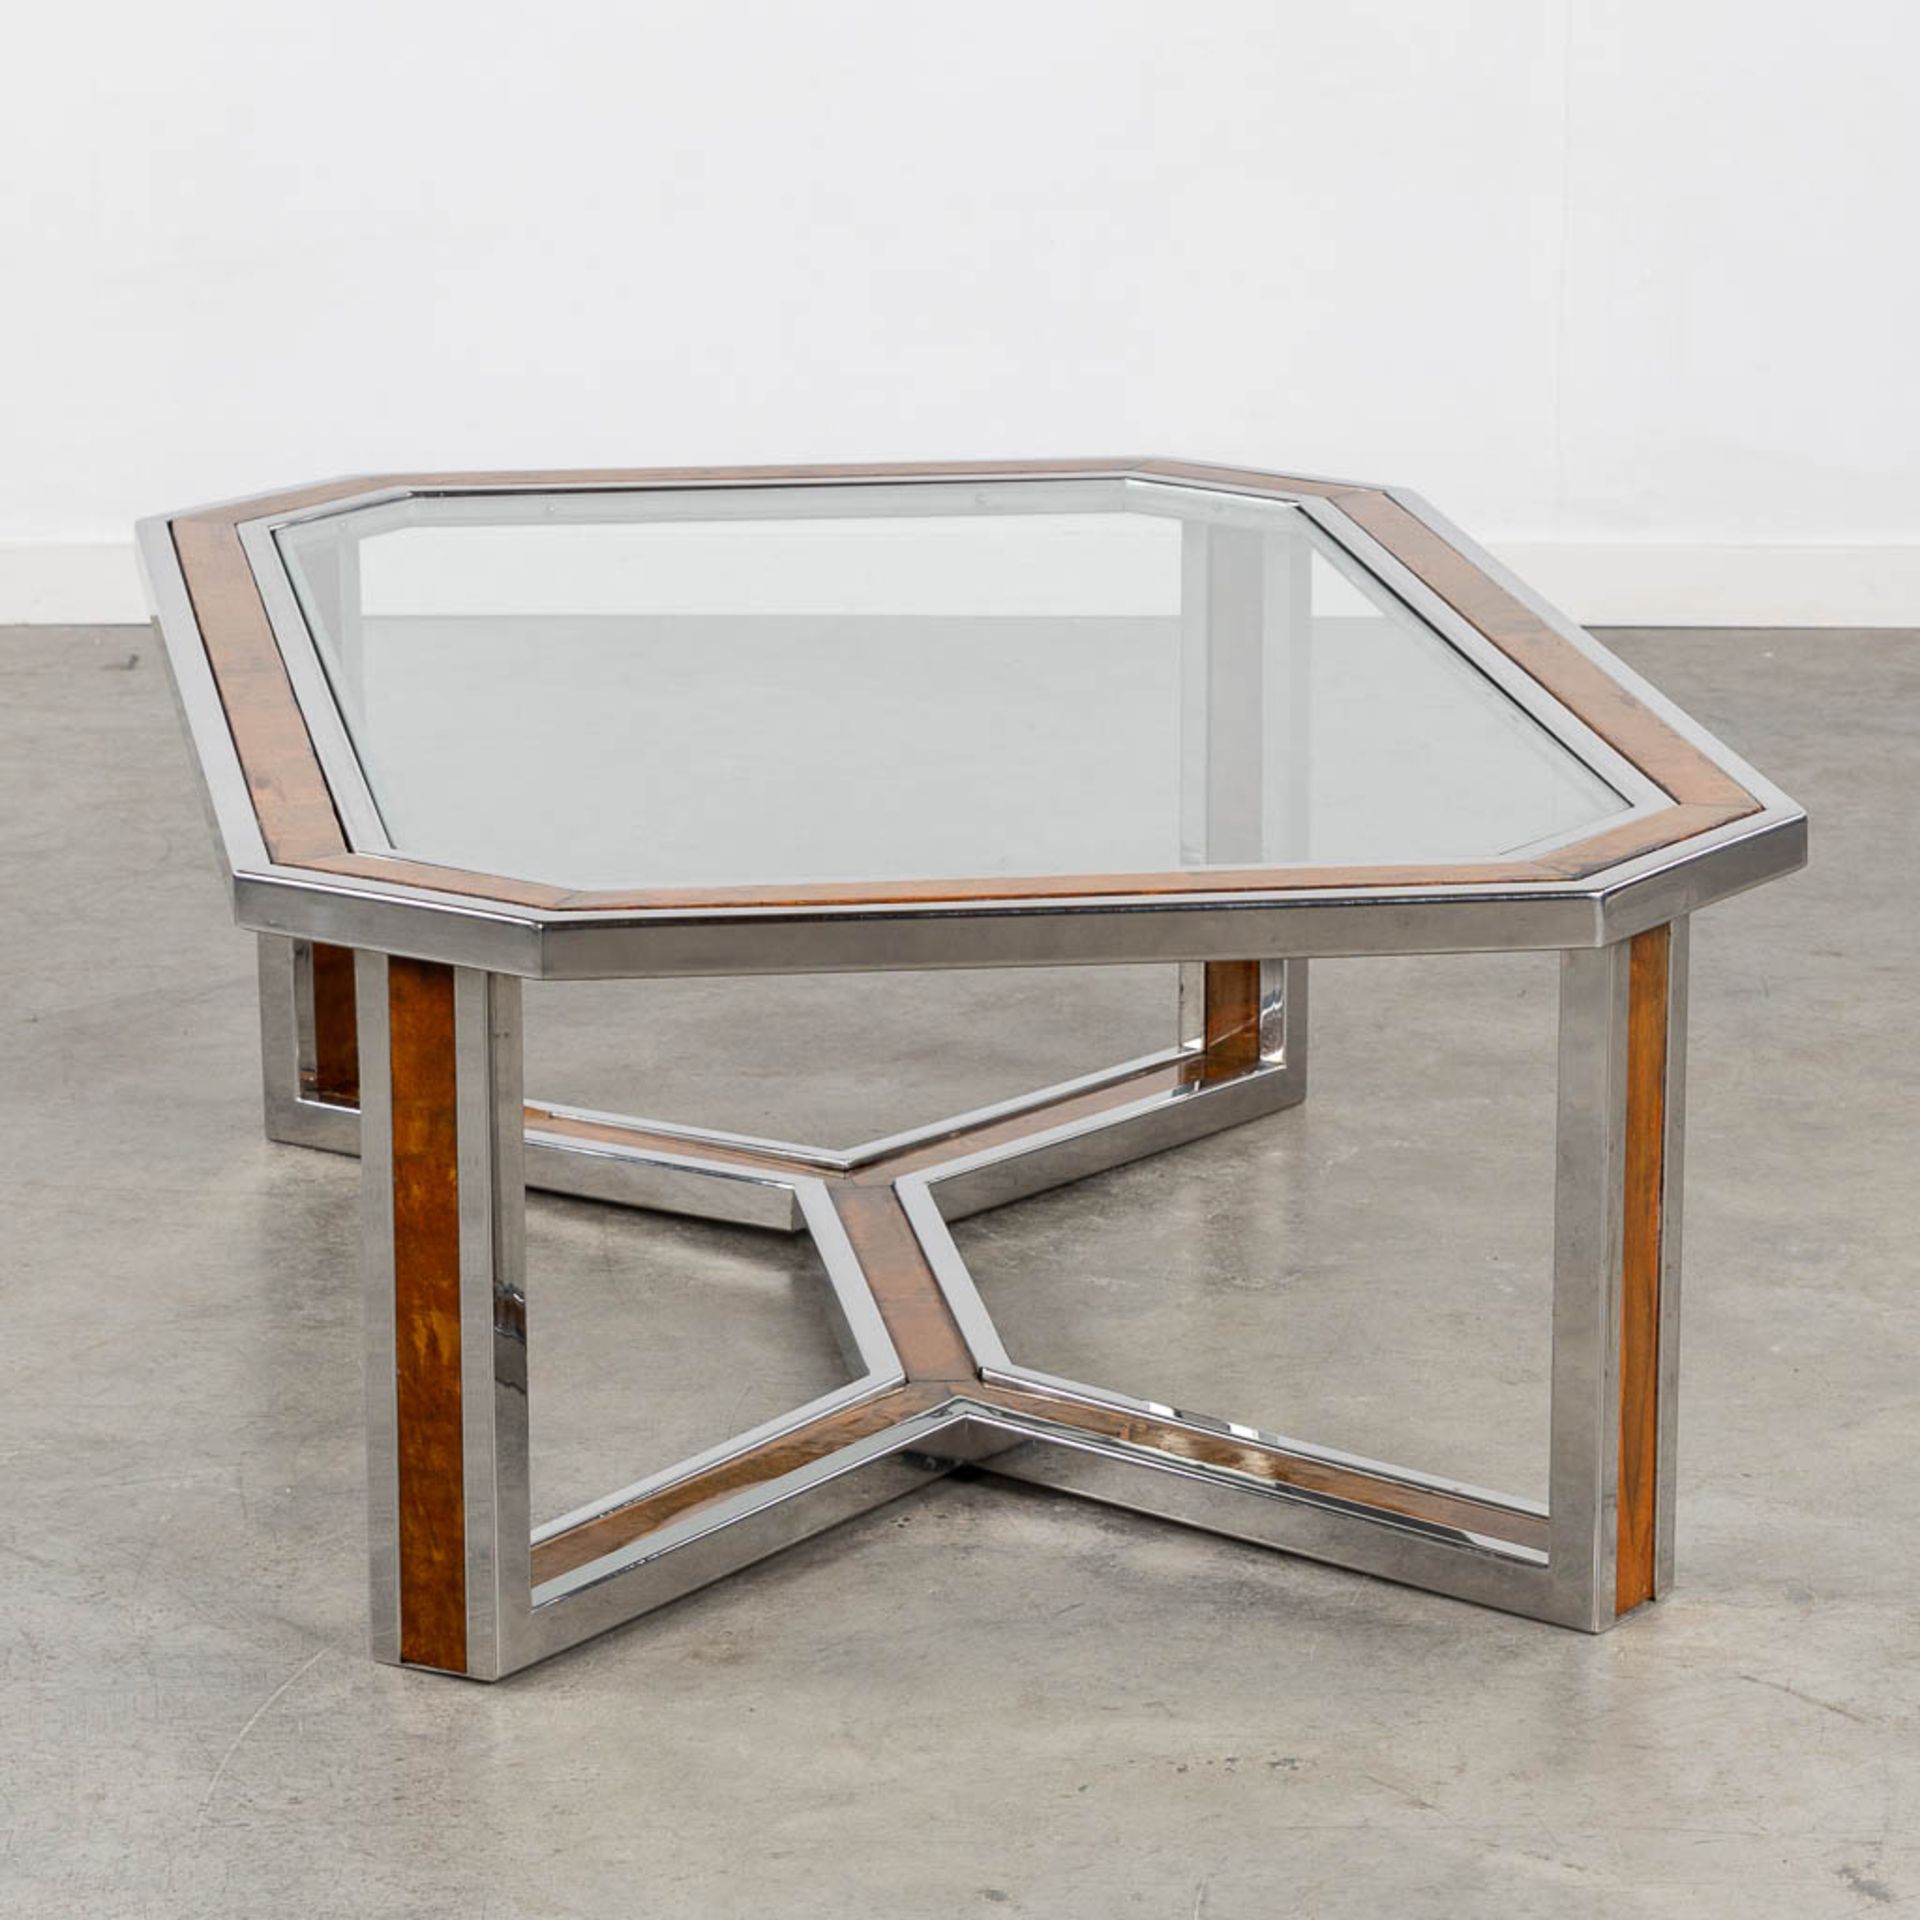 A coffee table, chrome with a faux wood inlay and a glass top. (L:80 x W:120 x H:40 cm) - Image 4 of 10